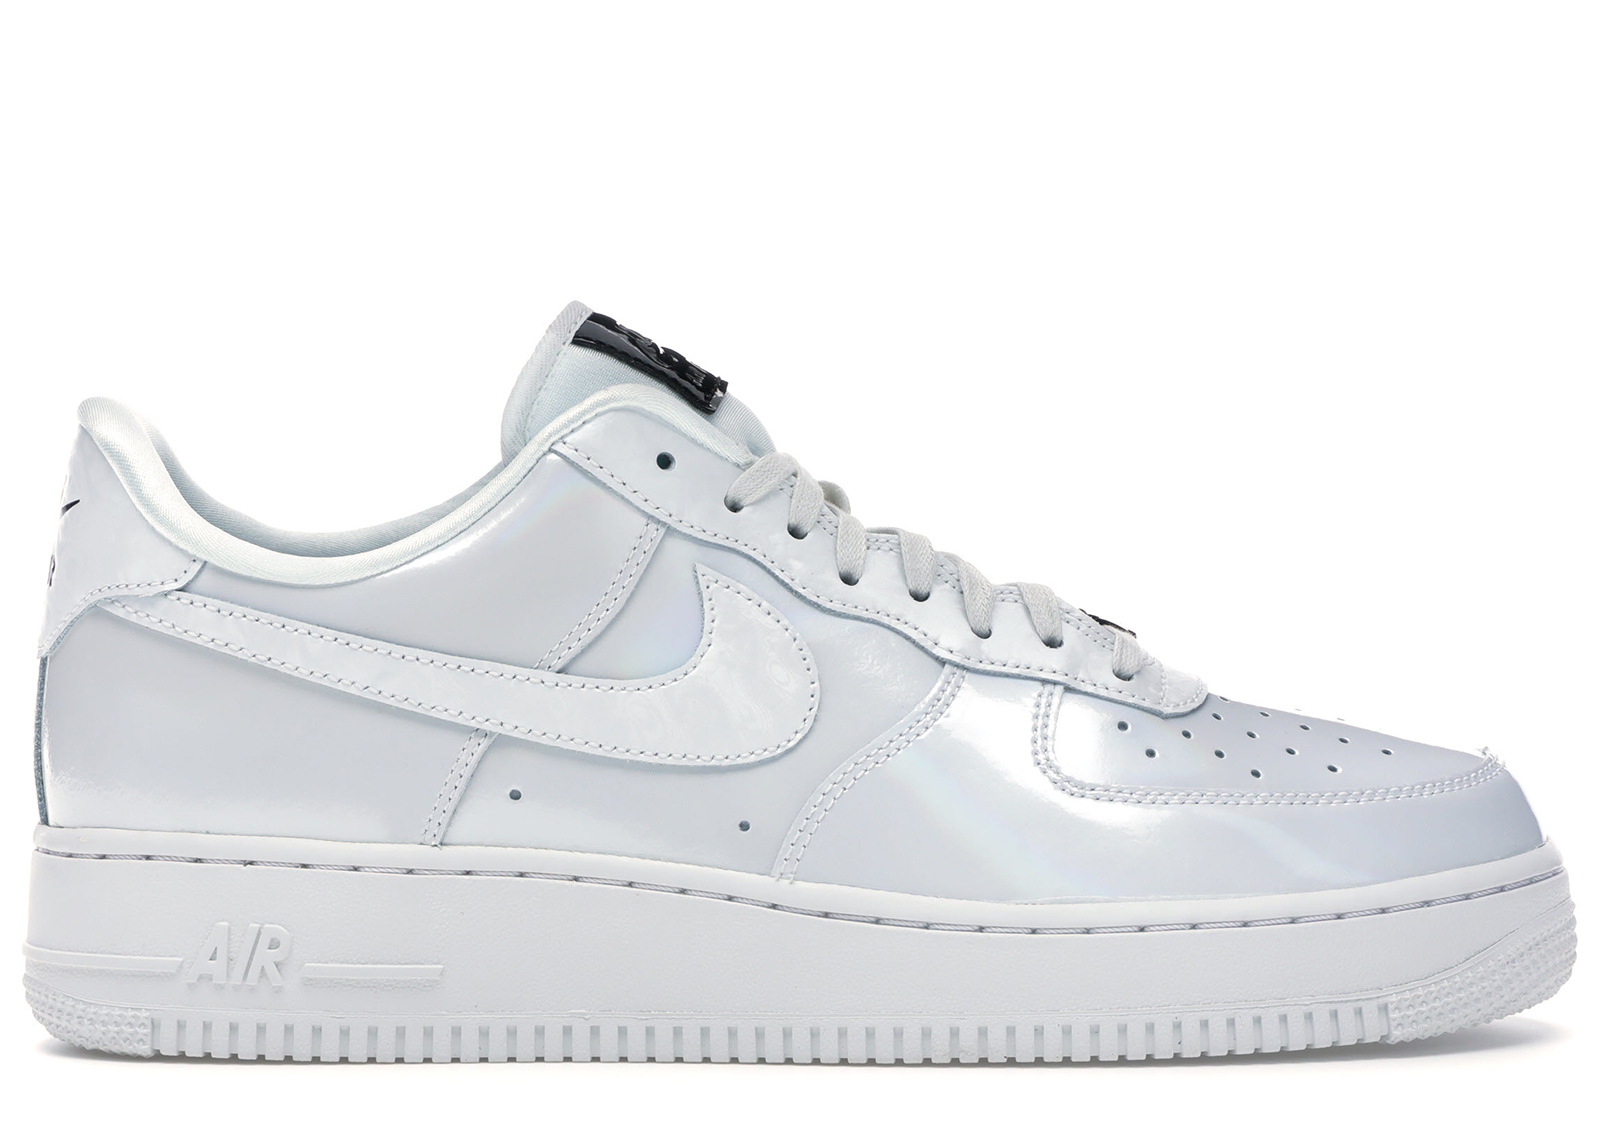 Nike Air Force 1 Low Lux All-Star White (2018) (Women's) - 898889 